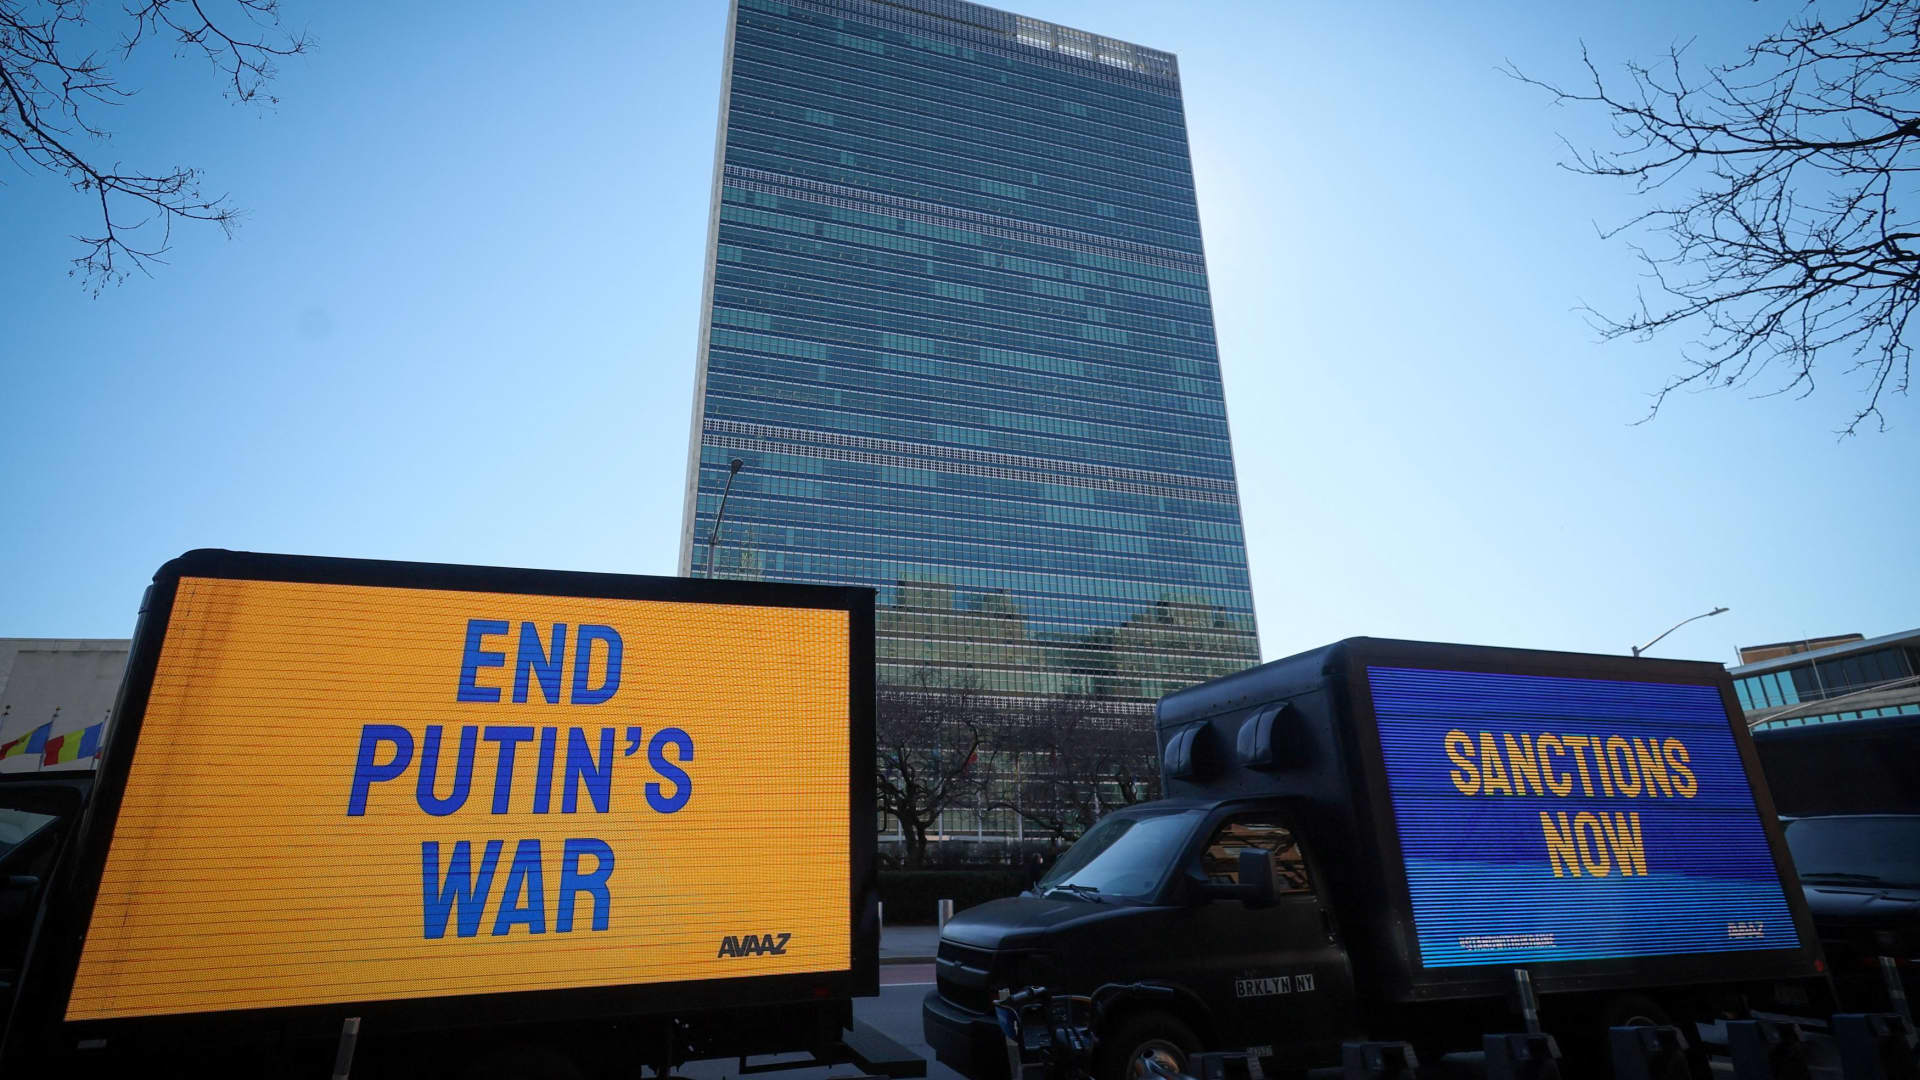 Trucks display electronic messages while protestors demonstrate outside United Nations headquarters, as inside diplomats hold an emergency session of the 193-member U.N. General Assembly on Russia's invasion of Ukraine, in Manhattan in New York City, February 28, 2022.